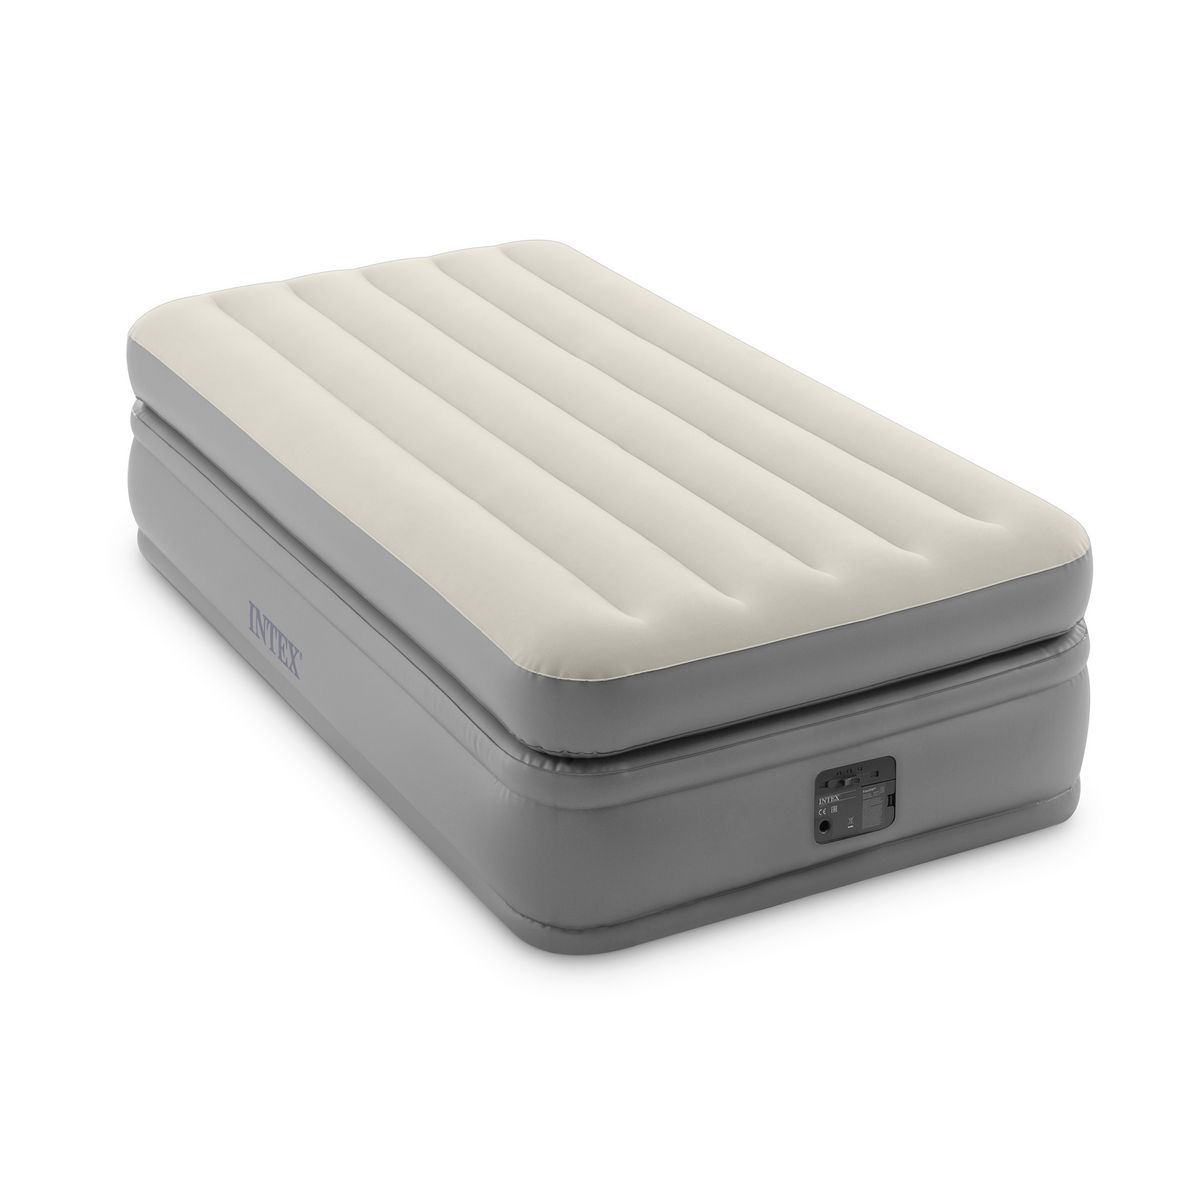 Matelas gonflable 1 personne 